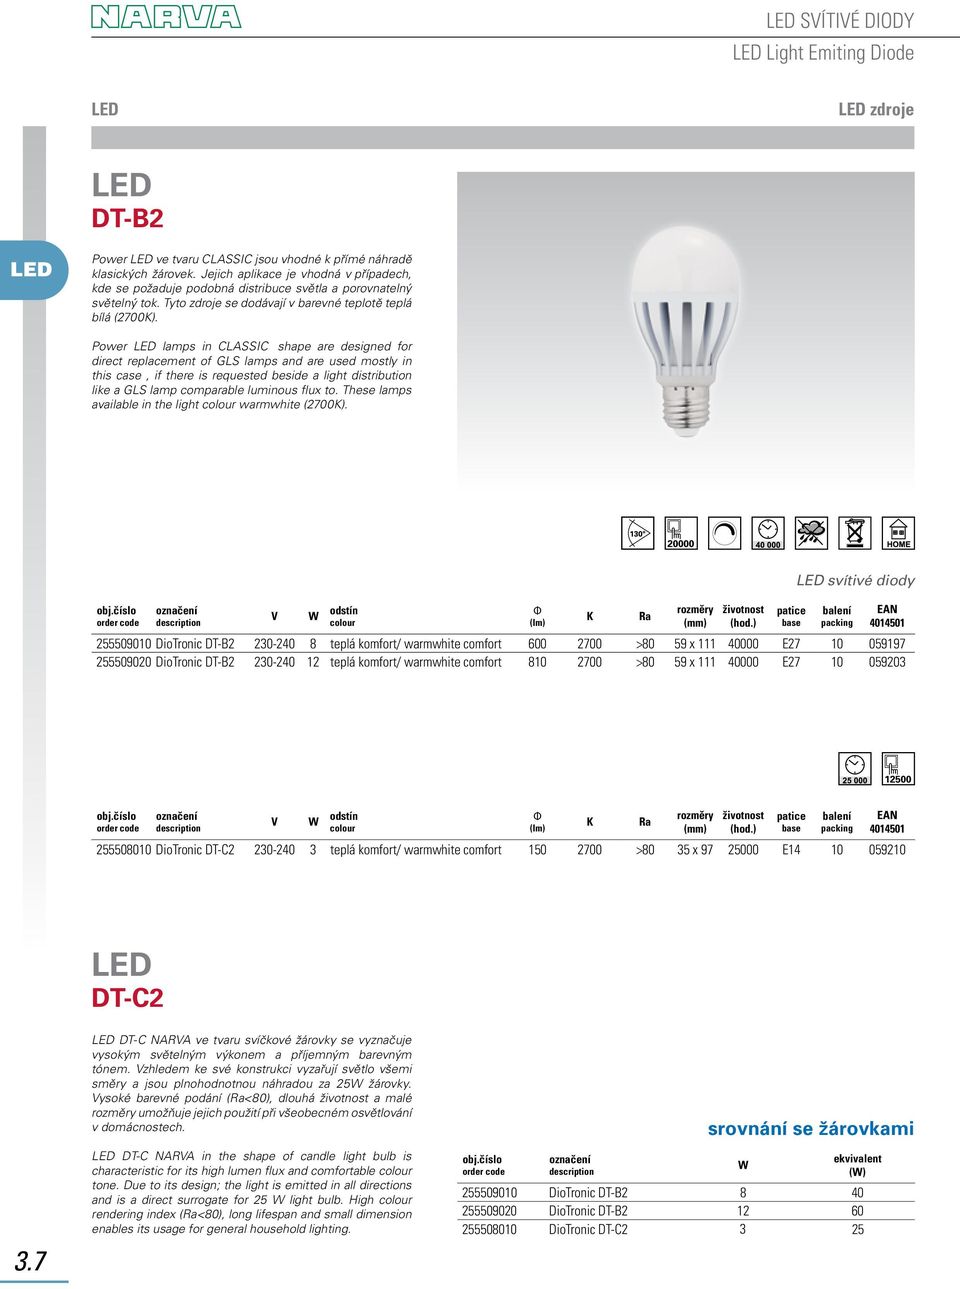 Power lamps in CLASSIC shape are designed for direct replacement of GLS lamps and are used mostly in this case, if there is requested beside a light distribution like a GLS lamp comparable luminous